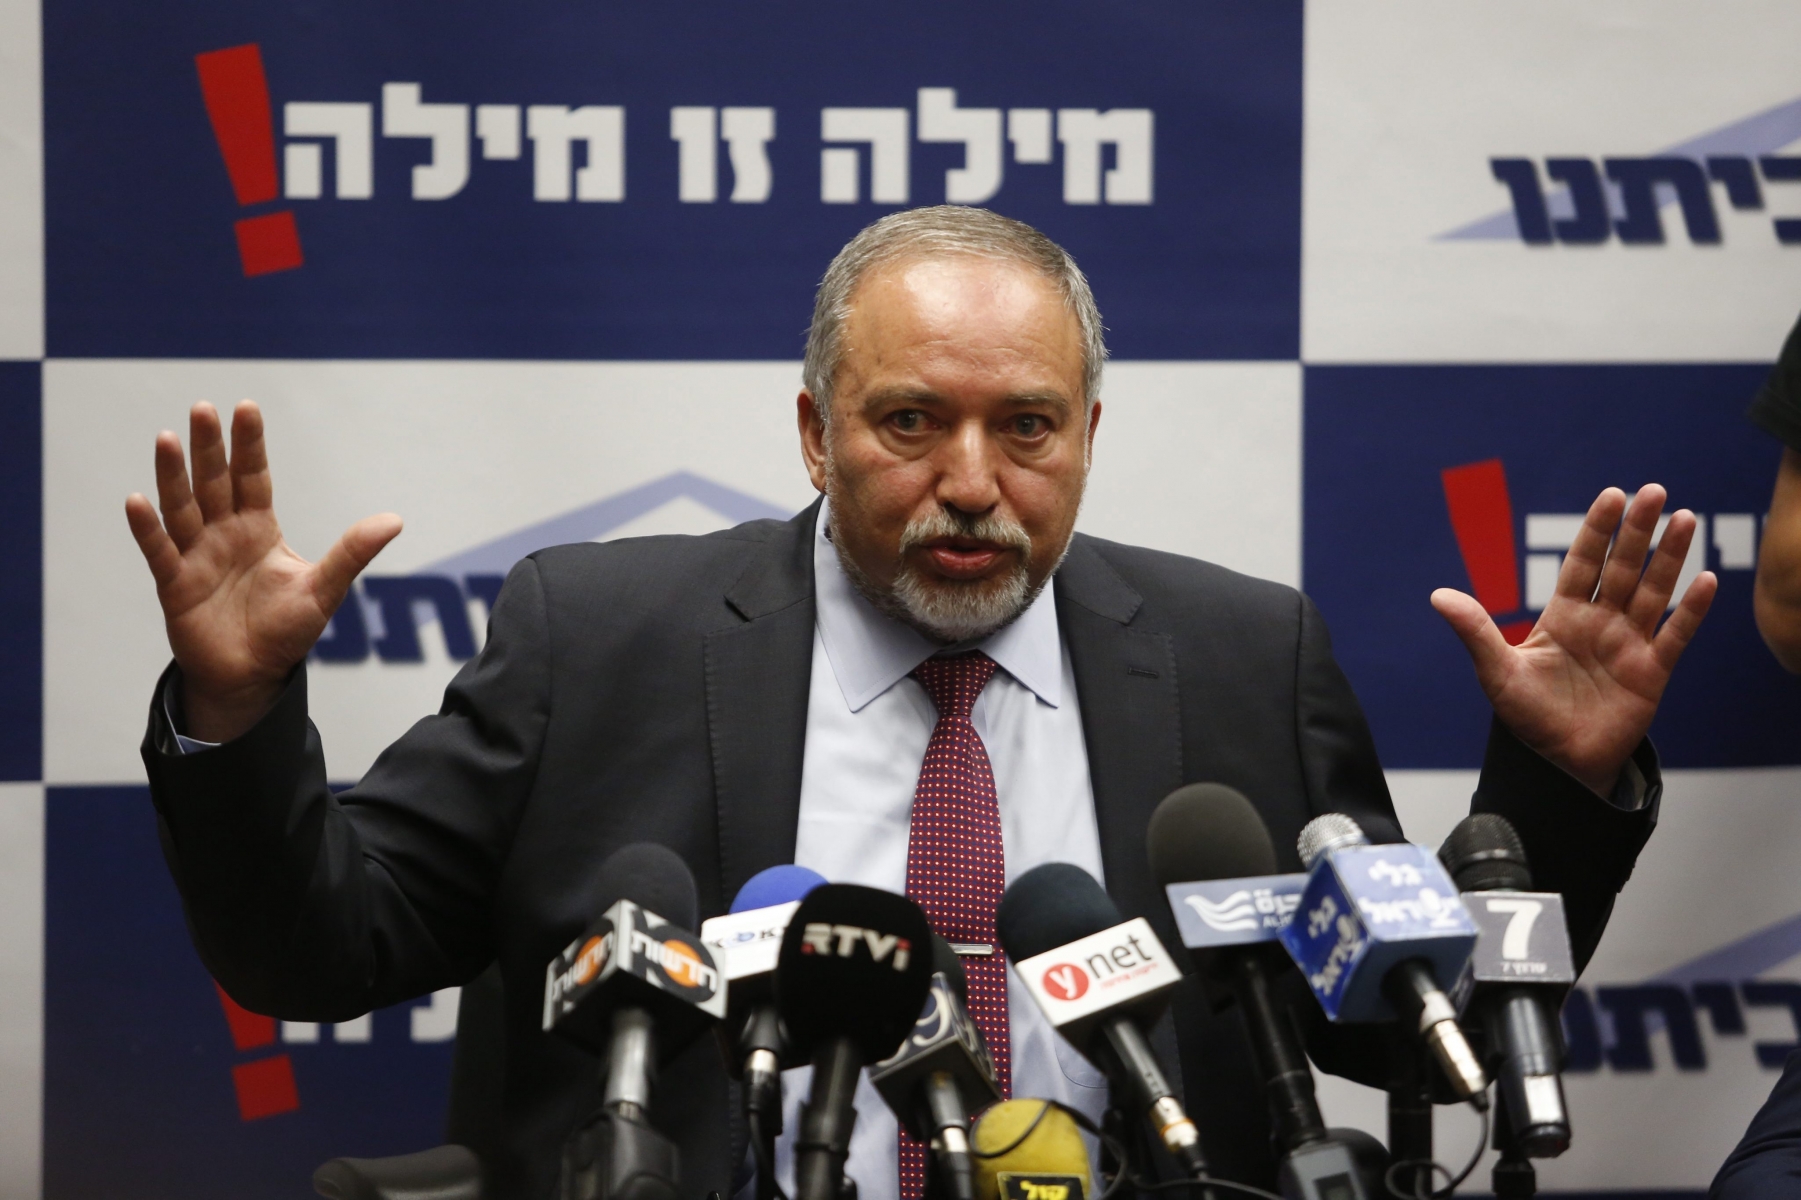 epa05325073 Former foreign minister Avigdor Lieberman speaks at a meeting of his party 'Israel Beitenu' at the Knesset (Israeli parliament) in Jerusalem, Israel, 23 May 2016. Lieberman is a leading candidate for the post as Defense Minister of Israel.  EPA/ABIR SULTAN ISRAEL PARTIES DEFENSE LIEBERMAN